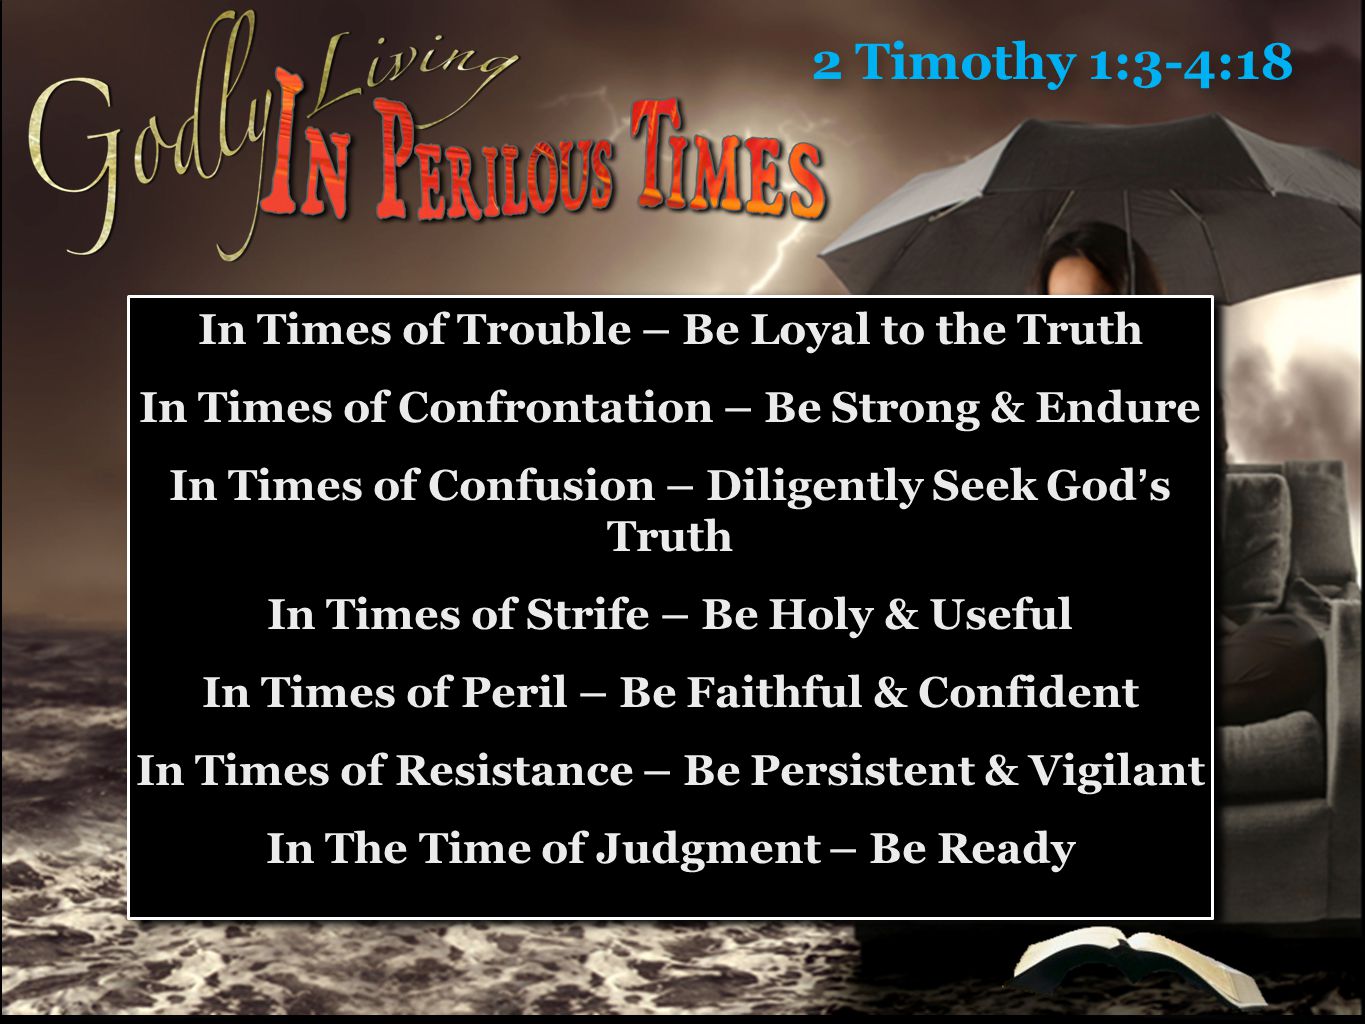 2 Timothy 1:3-4:18 In Times of Trouble – Be Loyal to the Truth In Times of Confrontation – Be Strong & Endure In Times of Confusion – Diligently Seek God’s Truth In Times of Strife – Be Holy & Useful In Times of Peril – Be Faithful & Confident In Times of Resistance – Be Persistent & Vigilant In The Time of Judgment – Be Ready In Times of Trouble – Be Loyal to the Truth In Times of Confrontation – Be Strong & Endure In Times of Confusion – Diligently Seek God’s Truth In Times of Strife – Be Holy & Useful In Times of Peril – Be Faithful & Confident In Times of Resistance – Be Persistent & Vigilant In The Time of Judgment – Be Ready